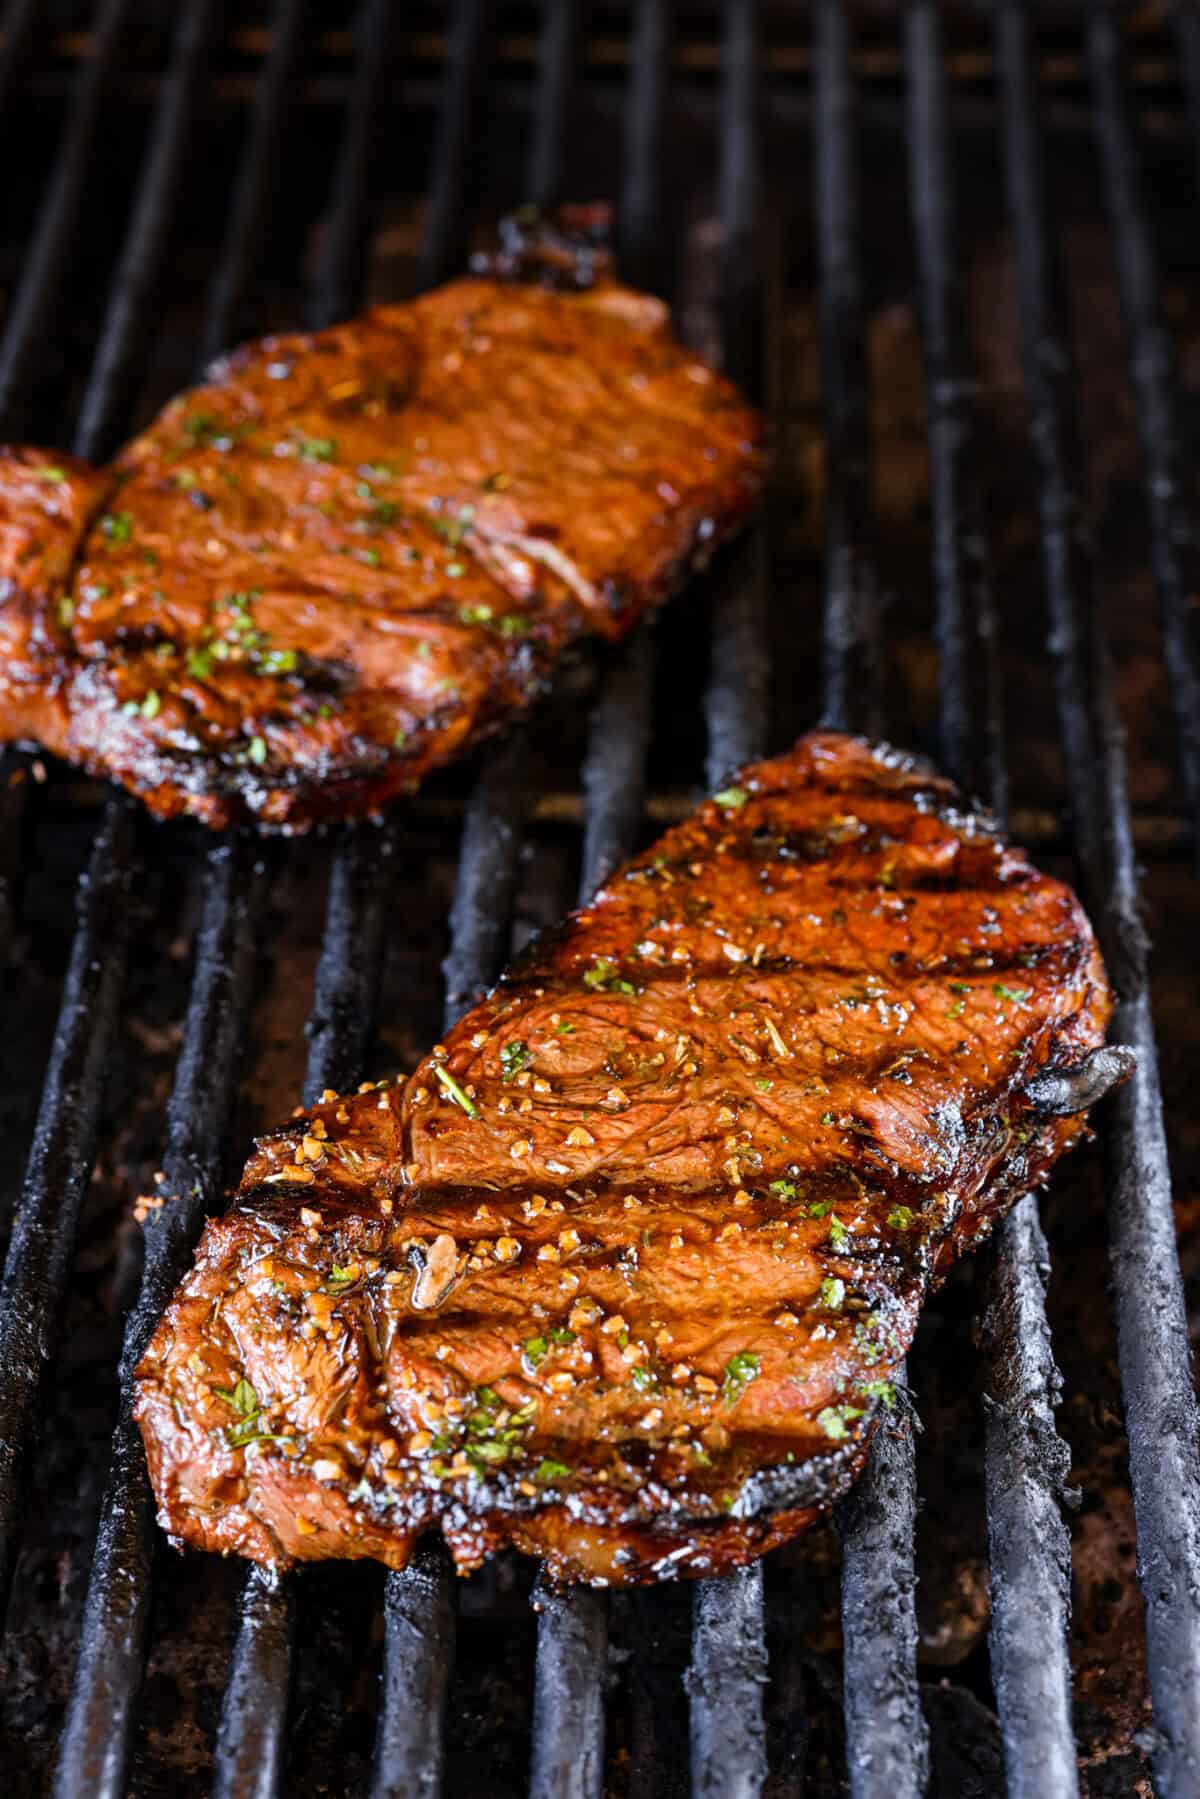 Close view of a grilled steak on the grill.